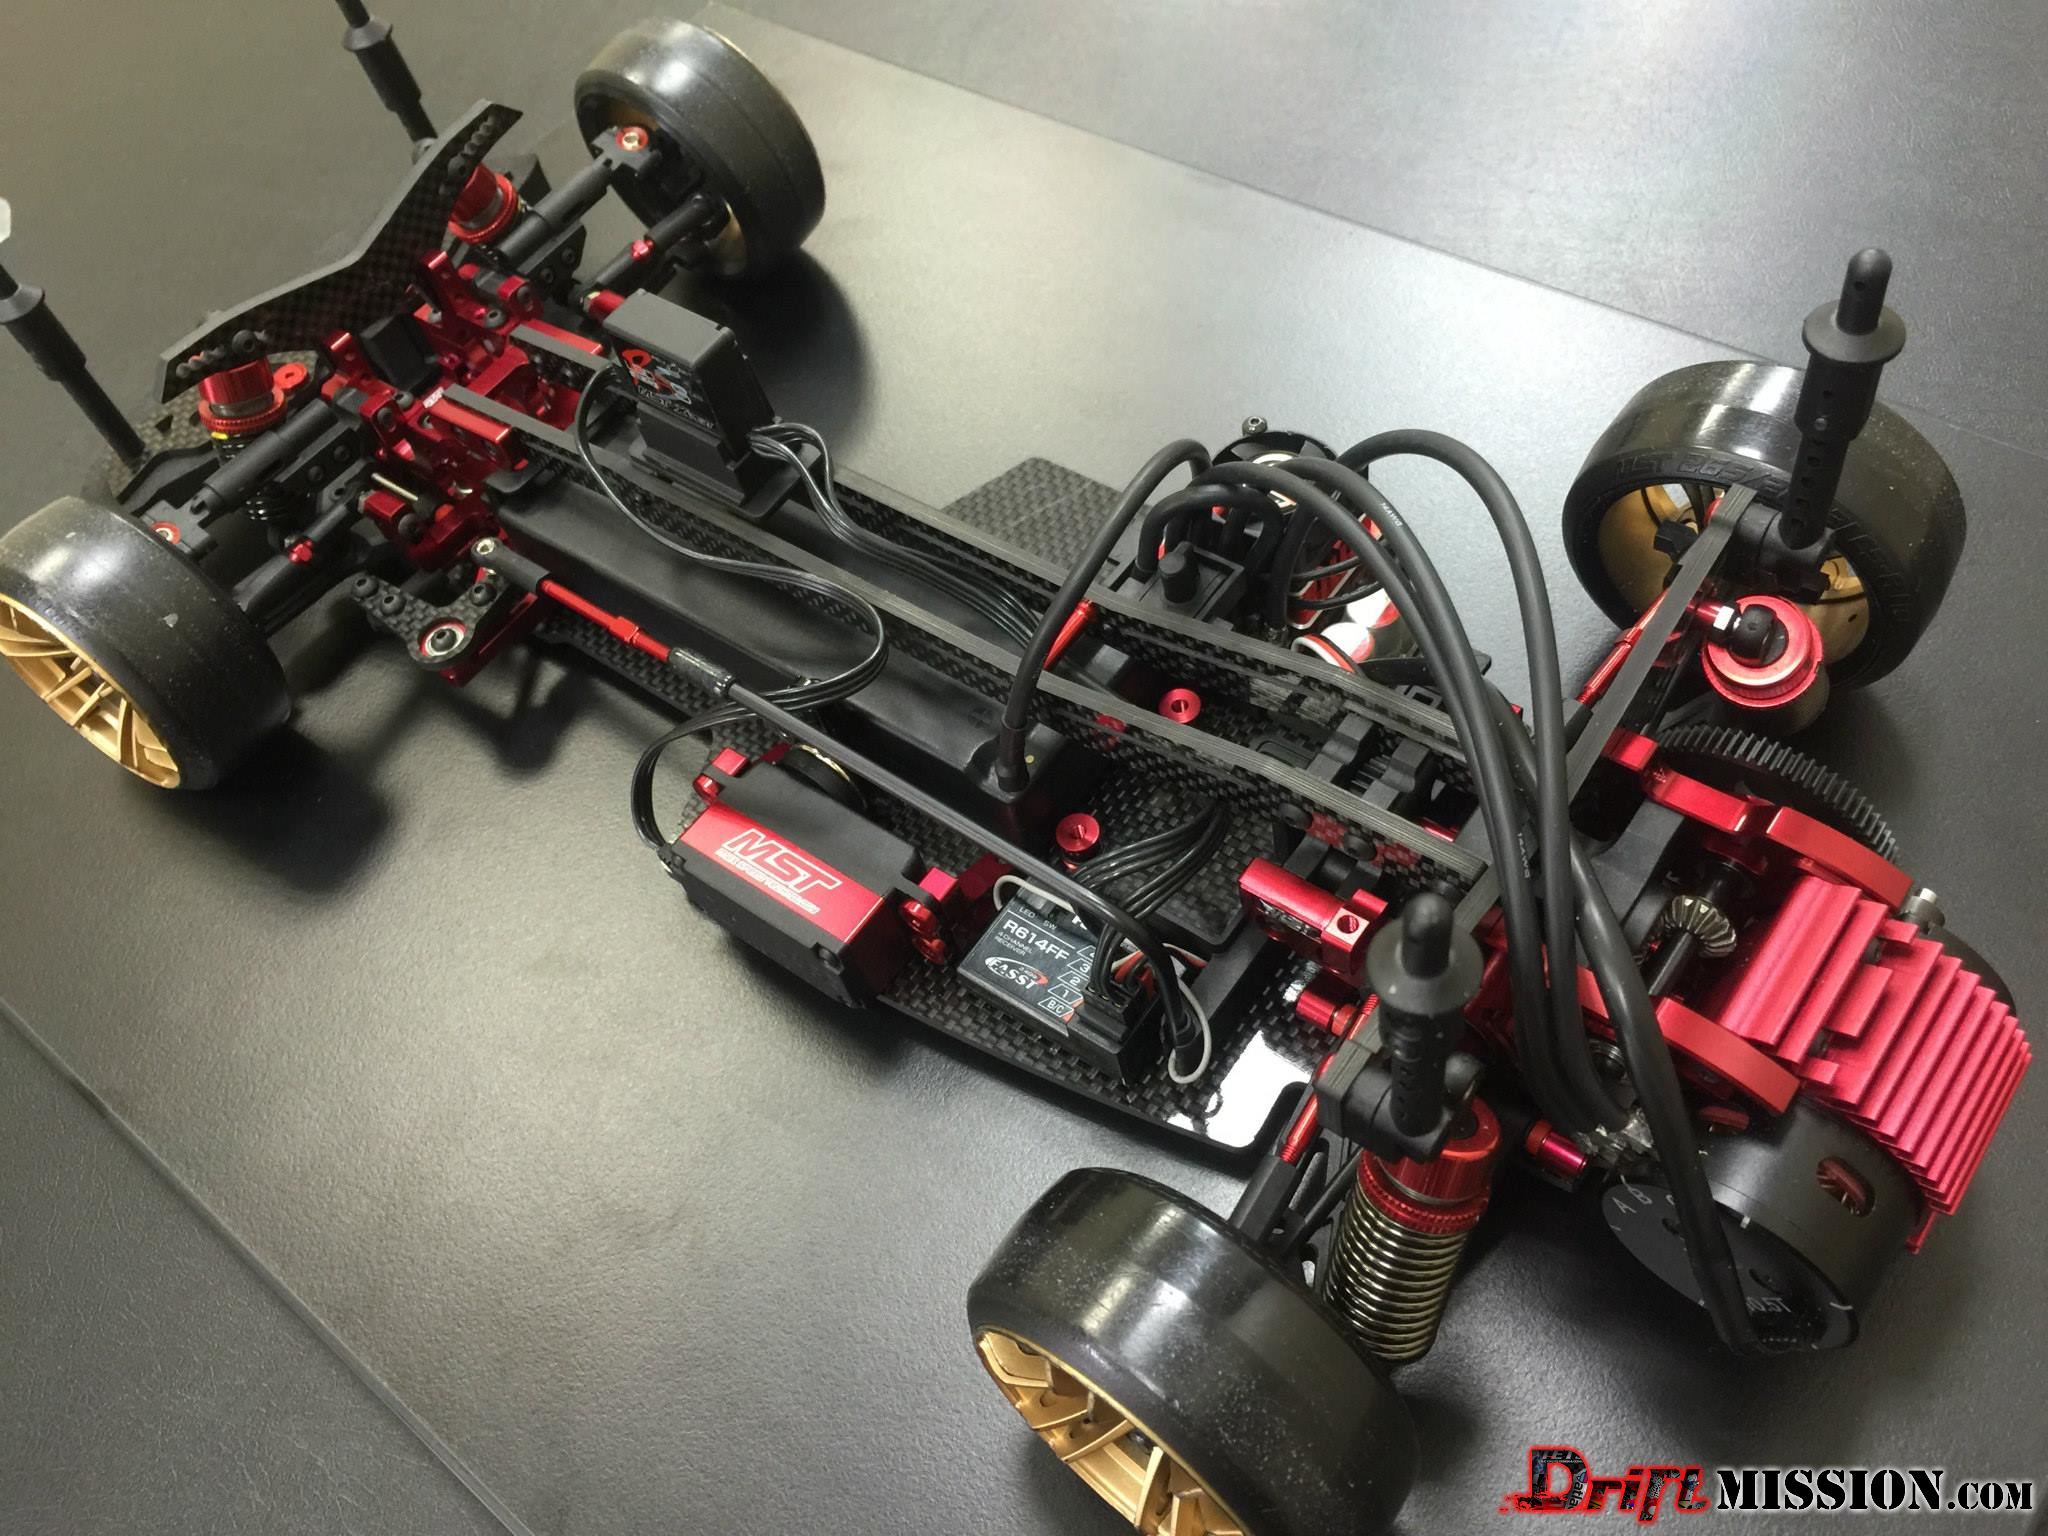 rwd rc drift chassis